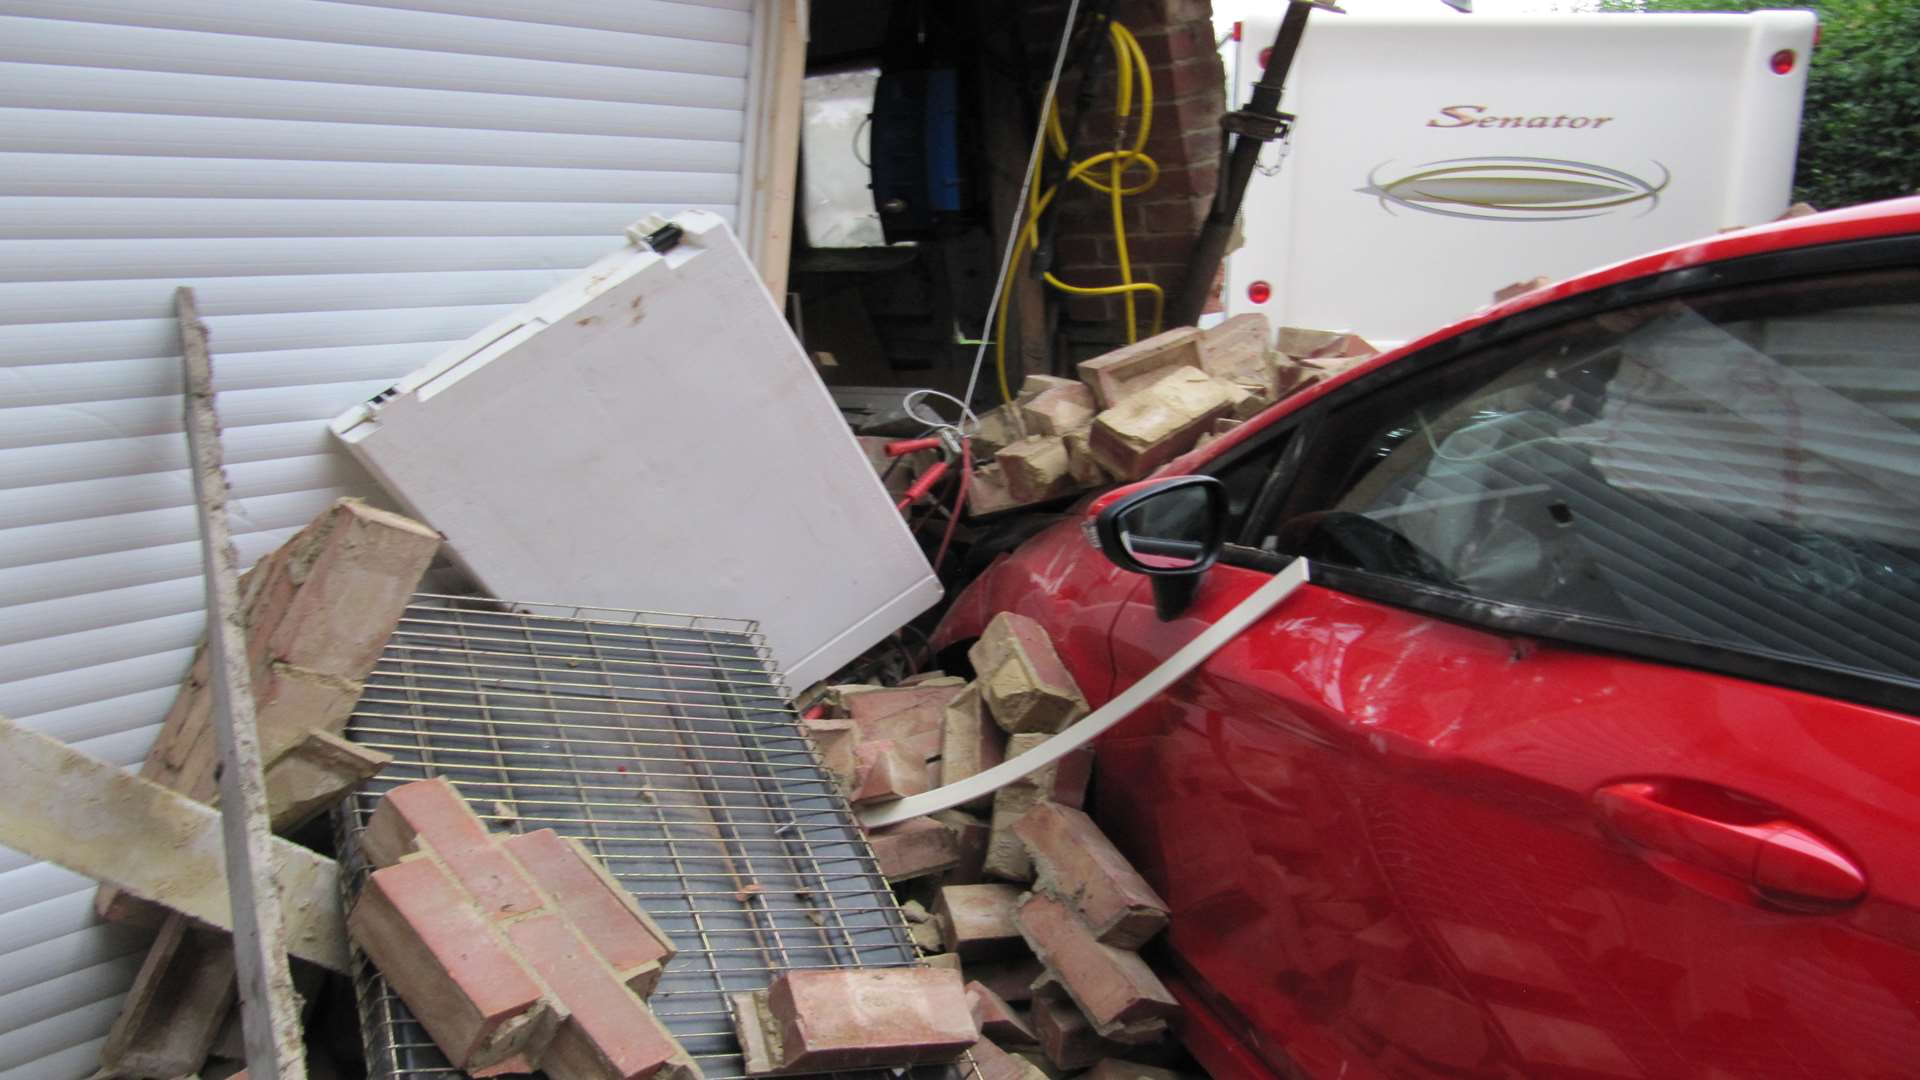 The car smashed into the side of the garage.